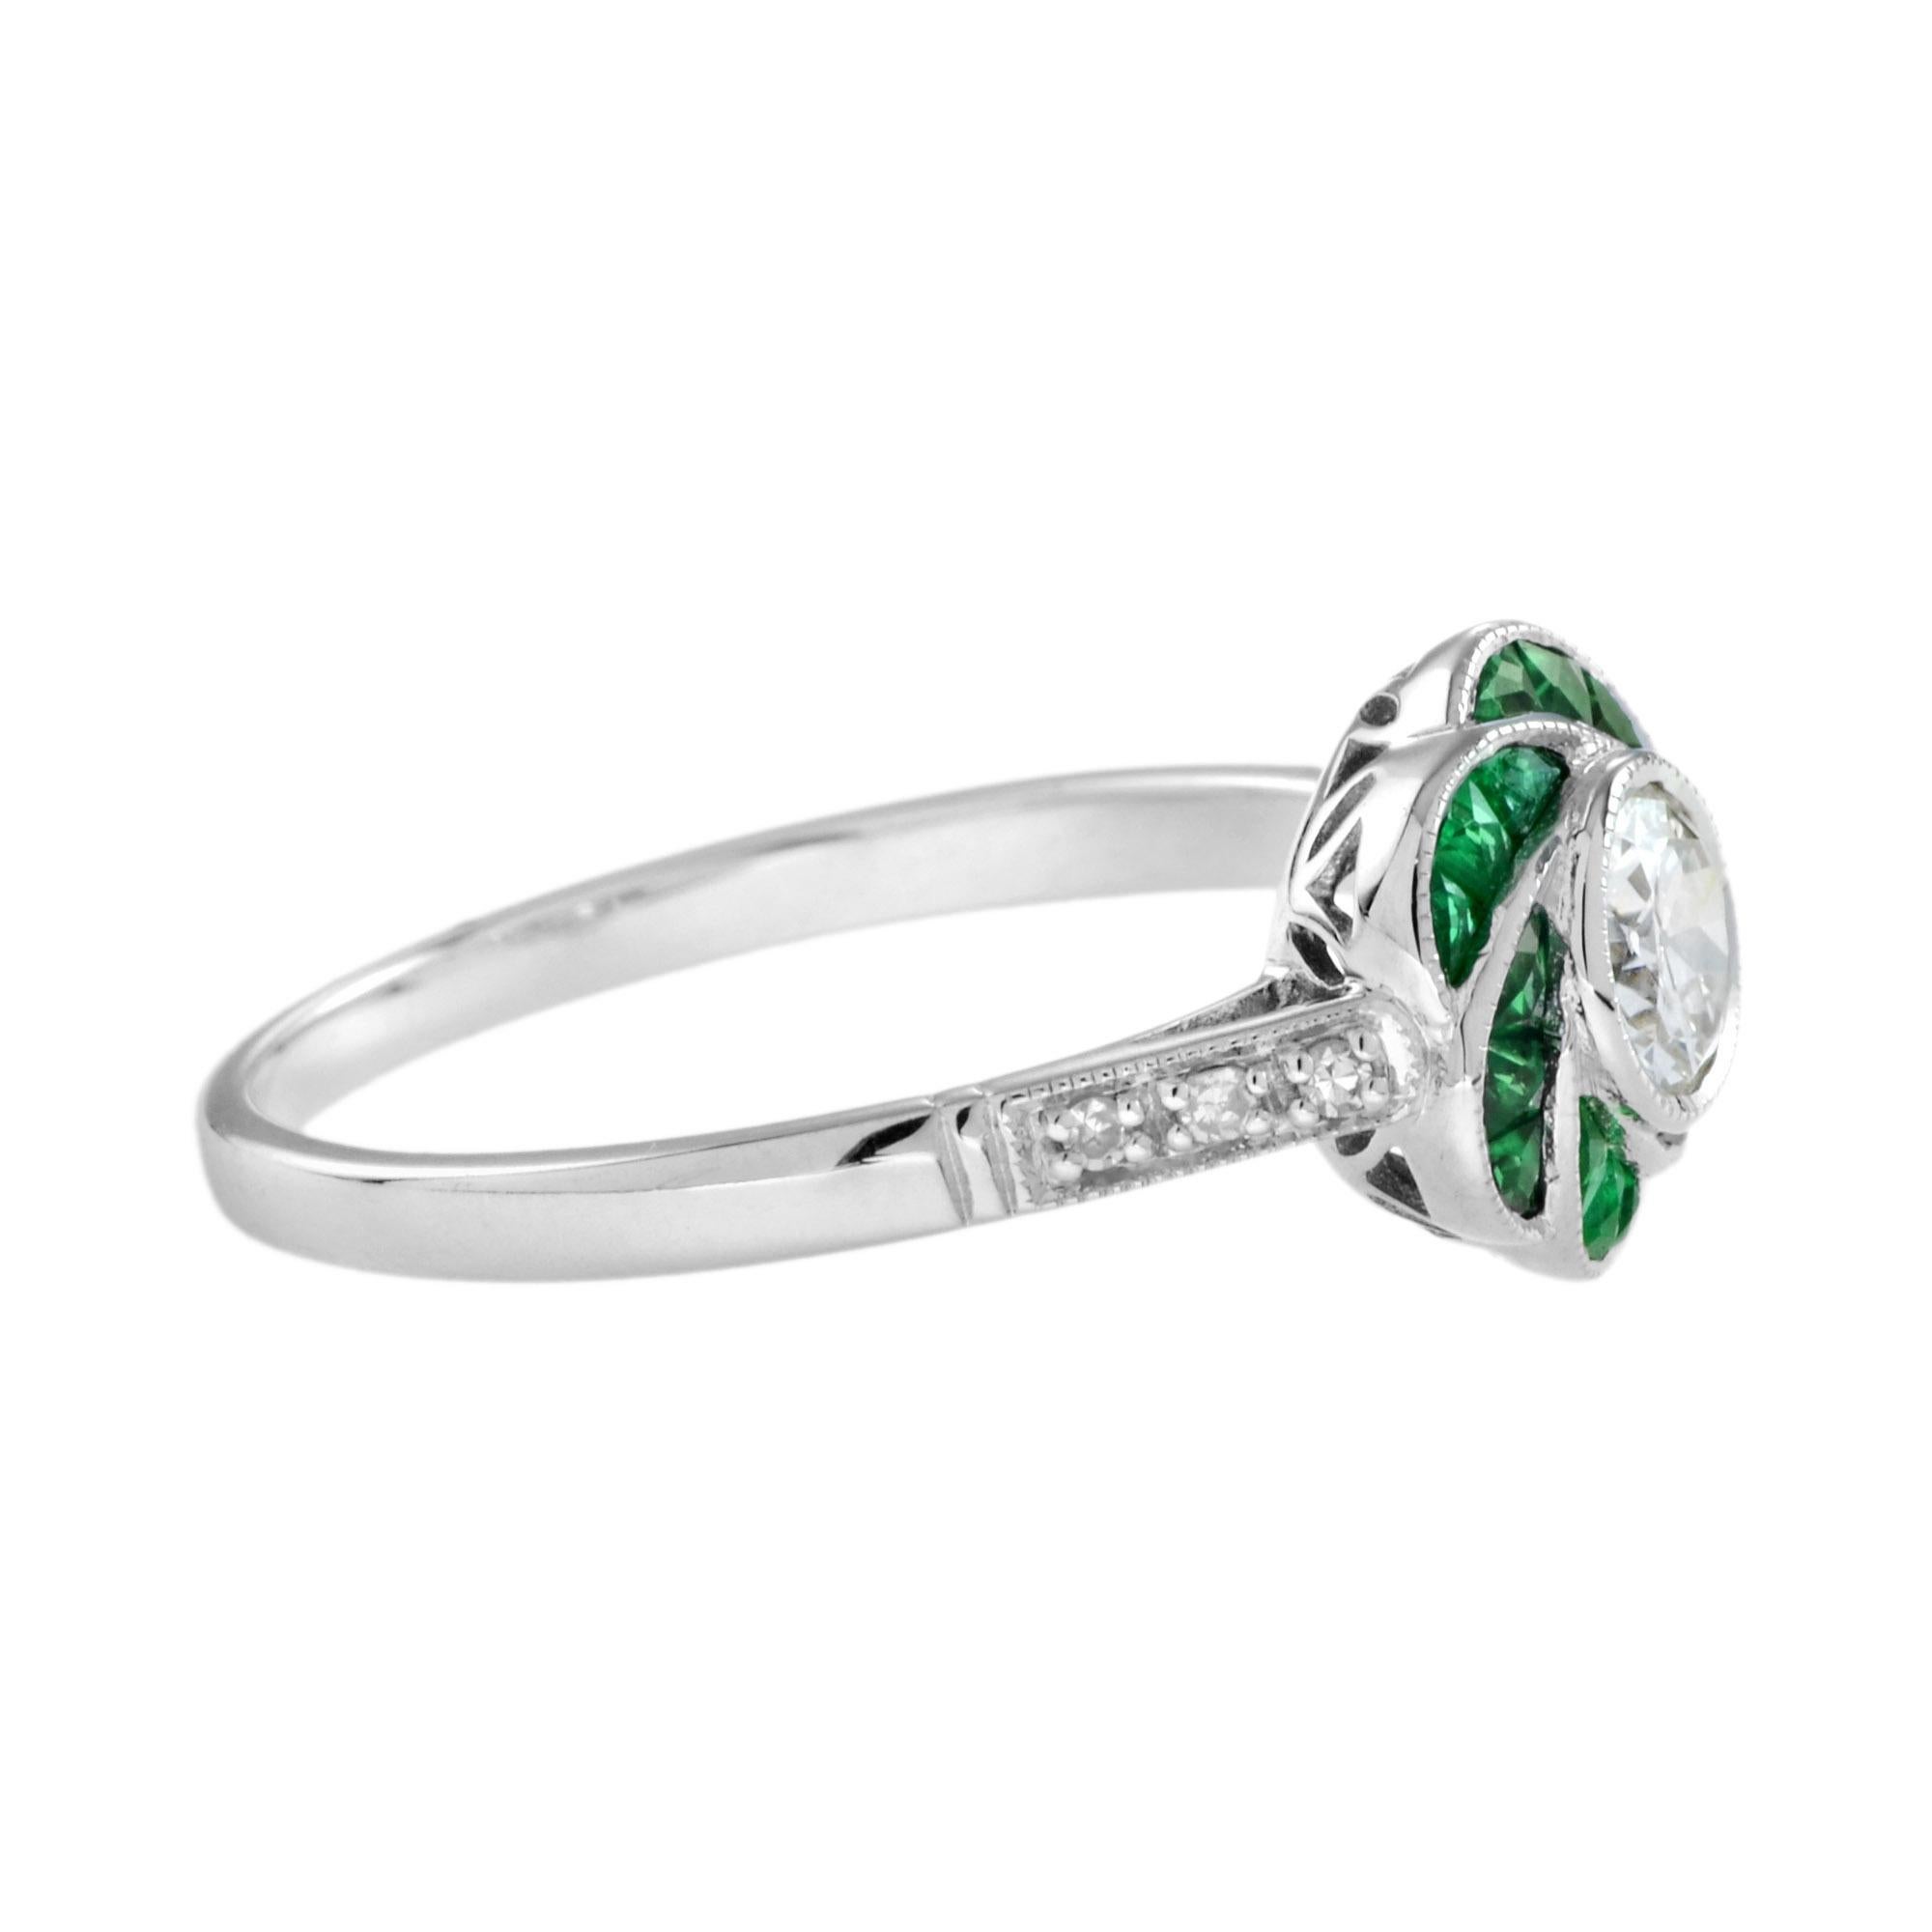 For Sale:  Diamond and Emerald Art Deco Style Rose Flower Ring in 18K White Gold 4